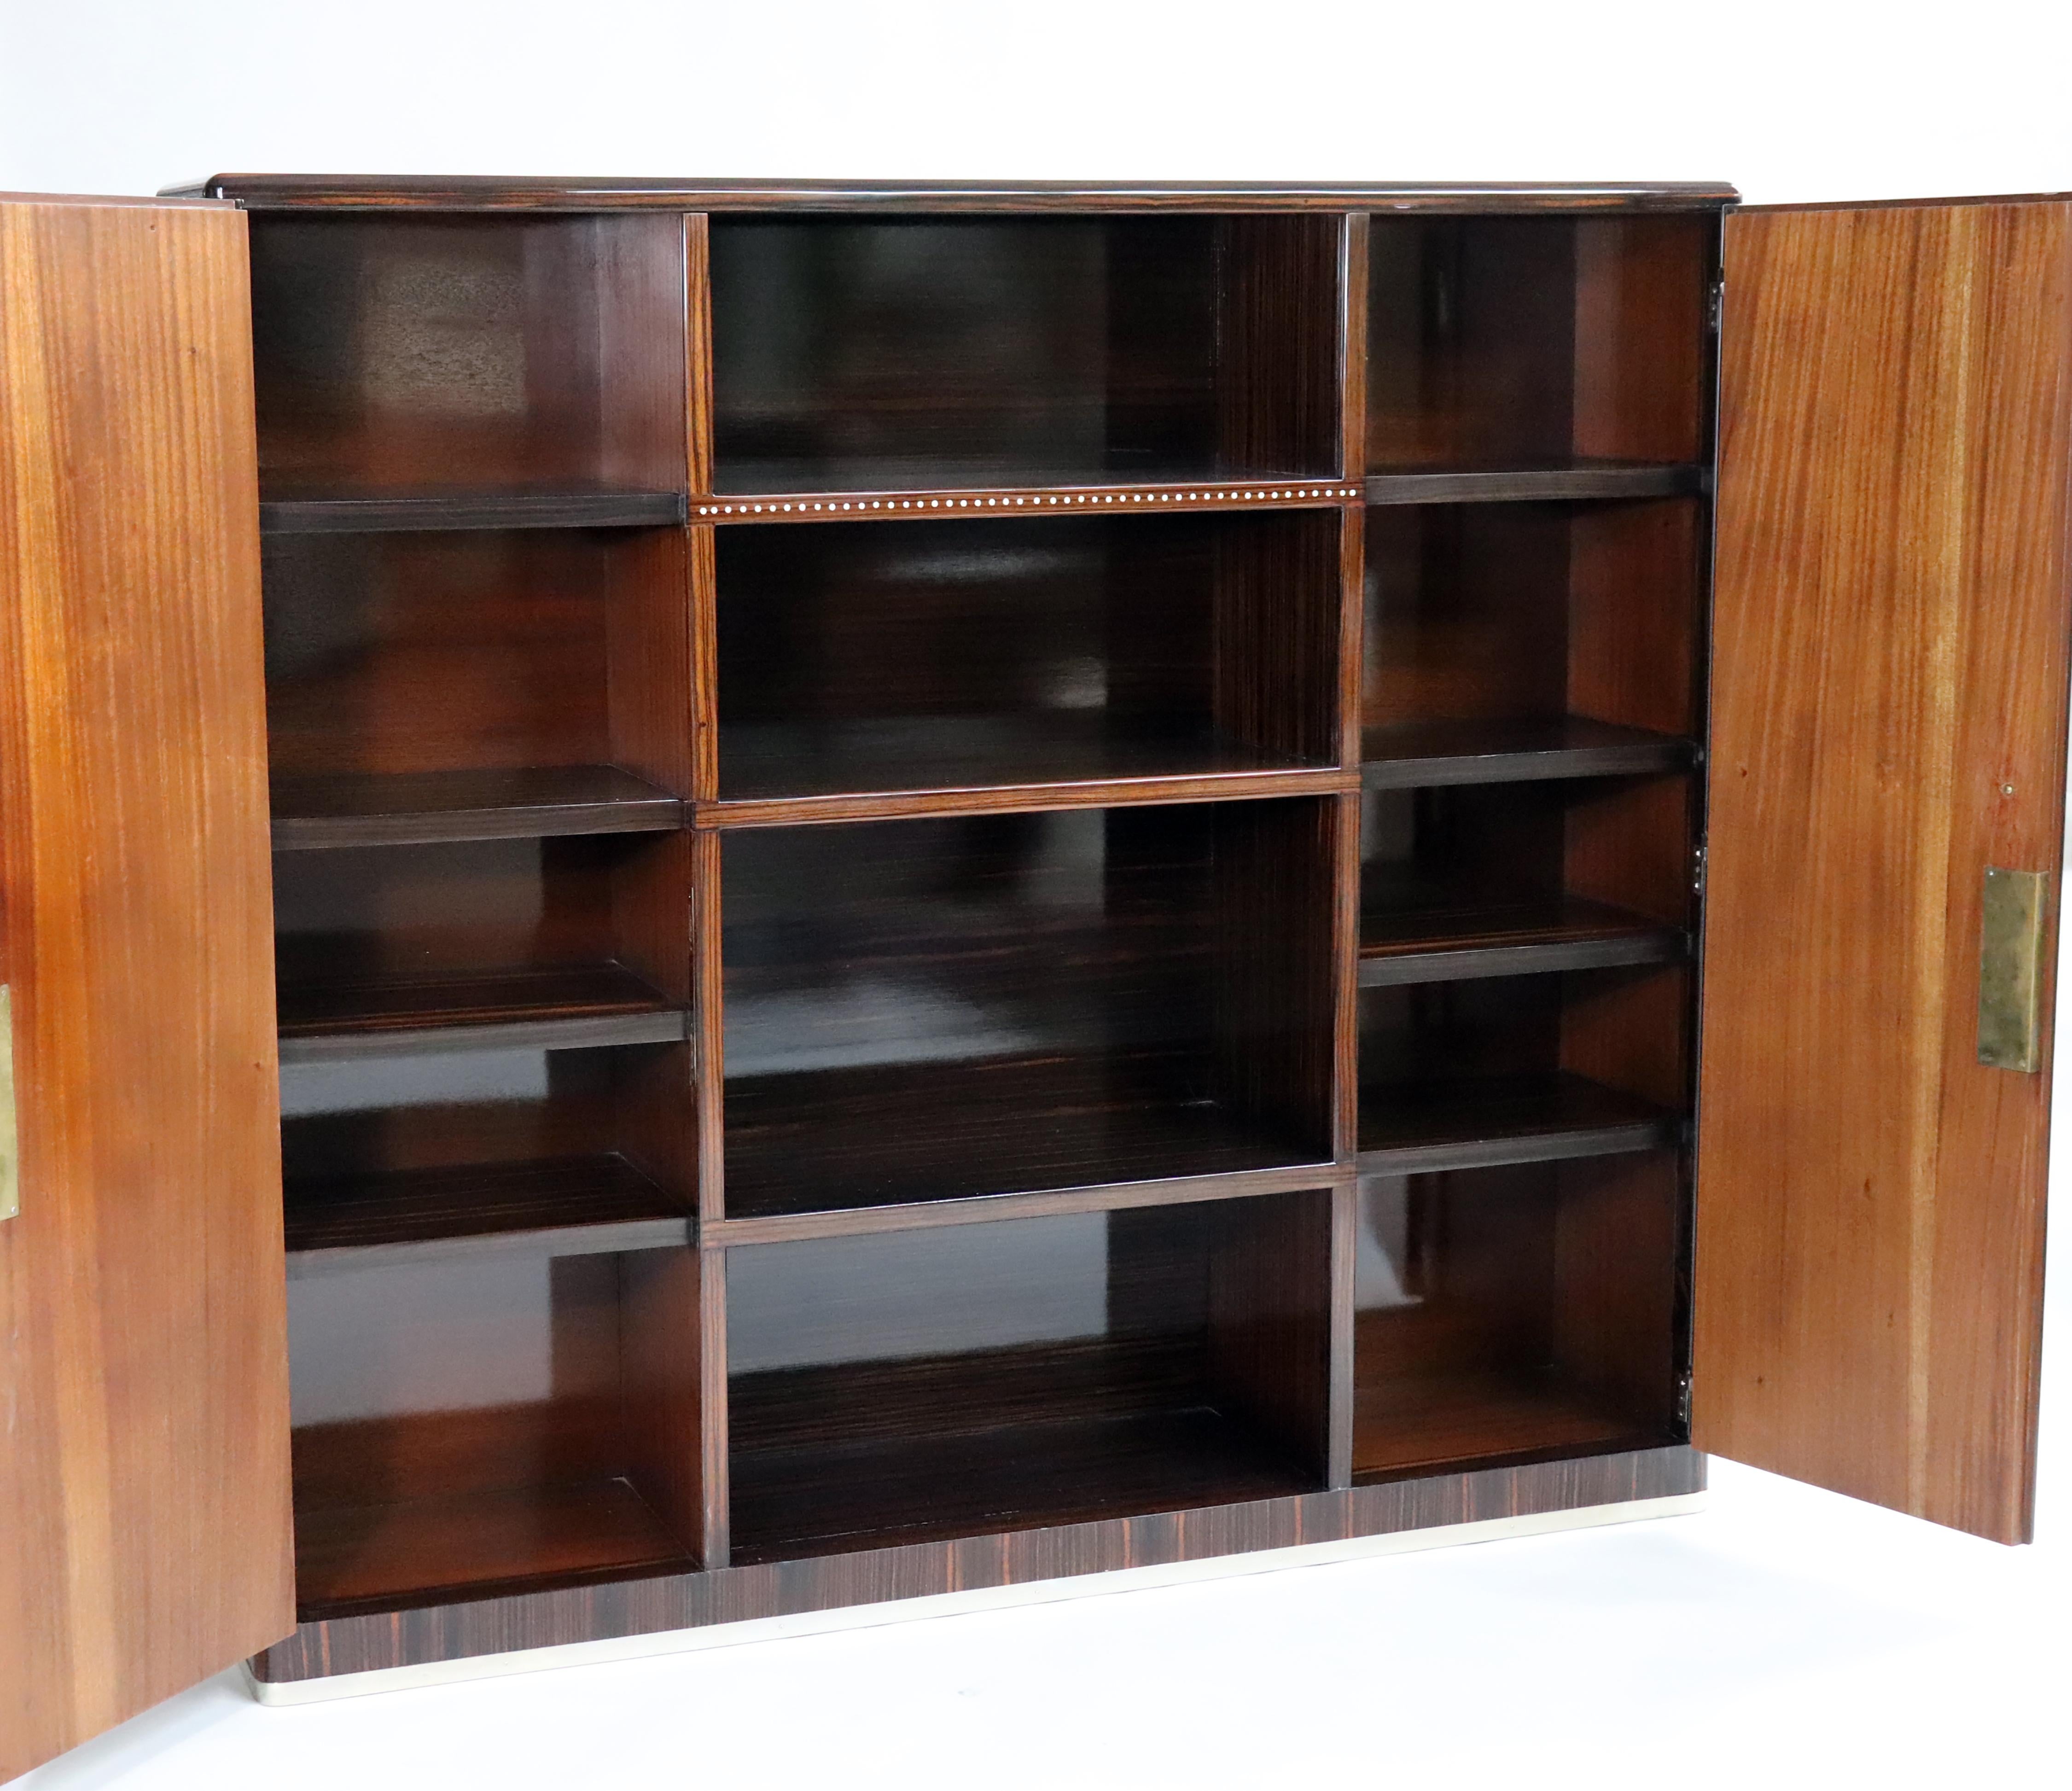 French Art Deco cabinet in walnut wood in high gloss with Nickel Bronze hardware and Mother of Pearl inlays. This Cabinet was designed by Maurice Rinck in 1935. Made in France.